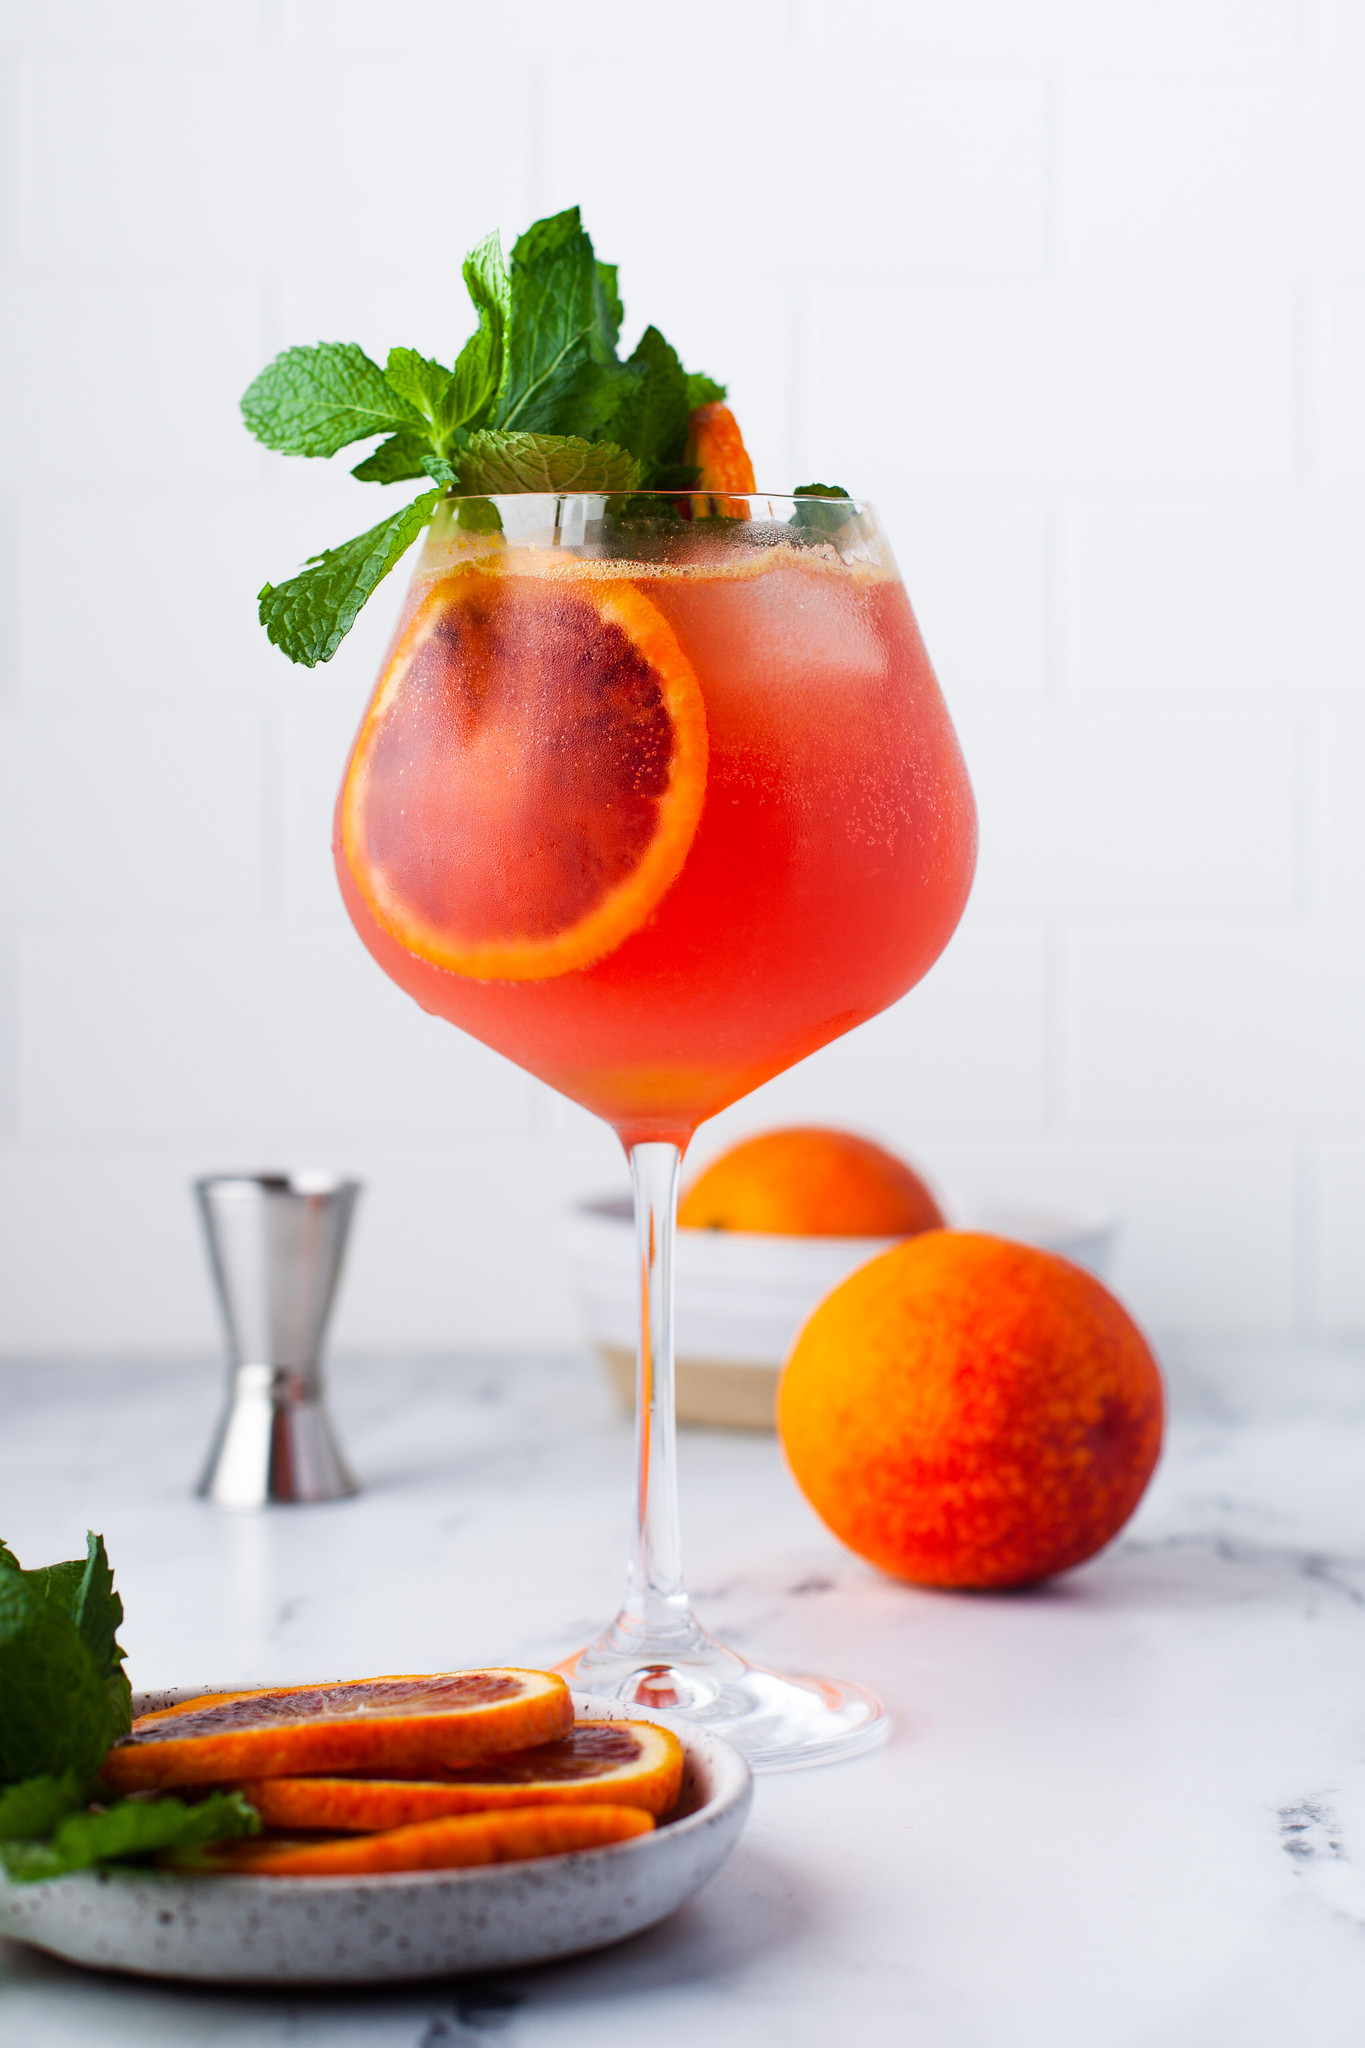 Blood Orange Mezcal Cocktail is a delicious bubbly drink made with smoky mezcal, bright blood orange juice, and tonic water. This is the perfect brunch cocktail!